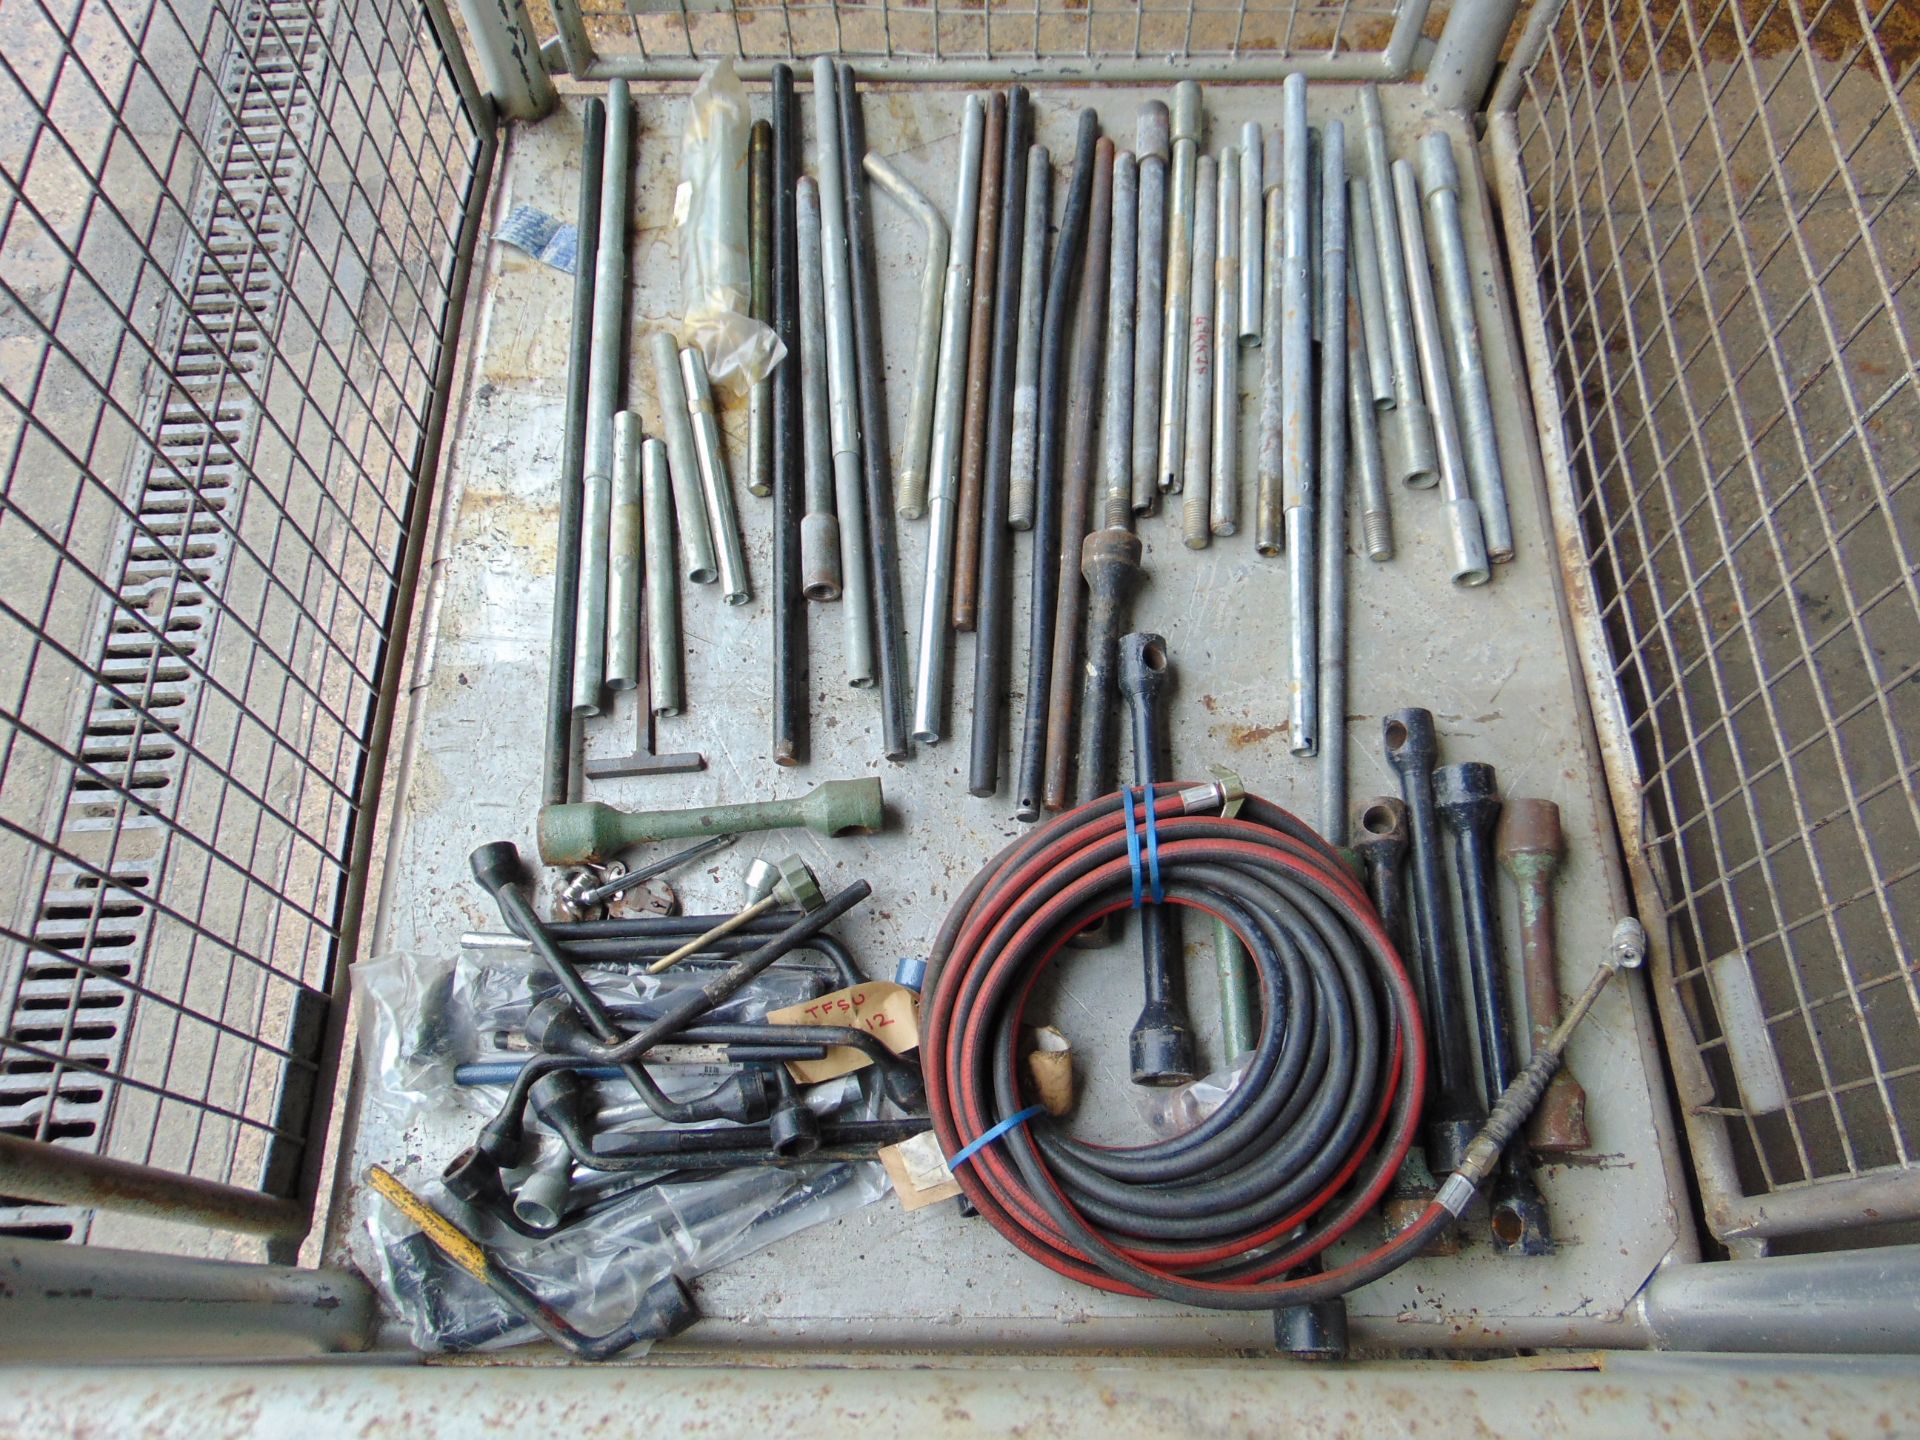 1 x Stillage Assortment of Tools, Wheel Wrenches, Air Line Etc - Image 5 of 5